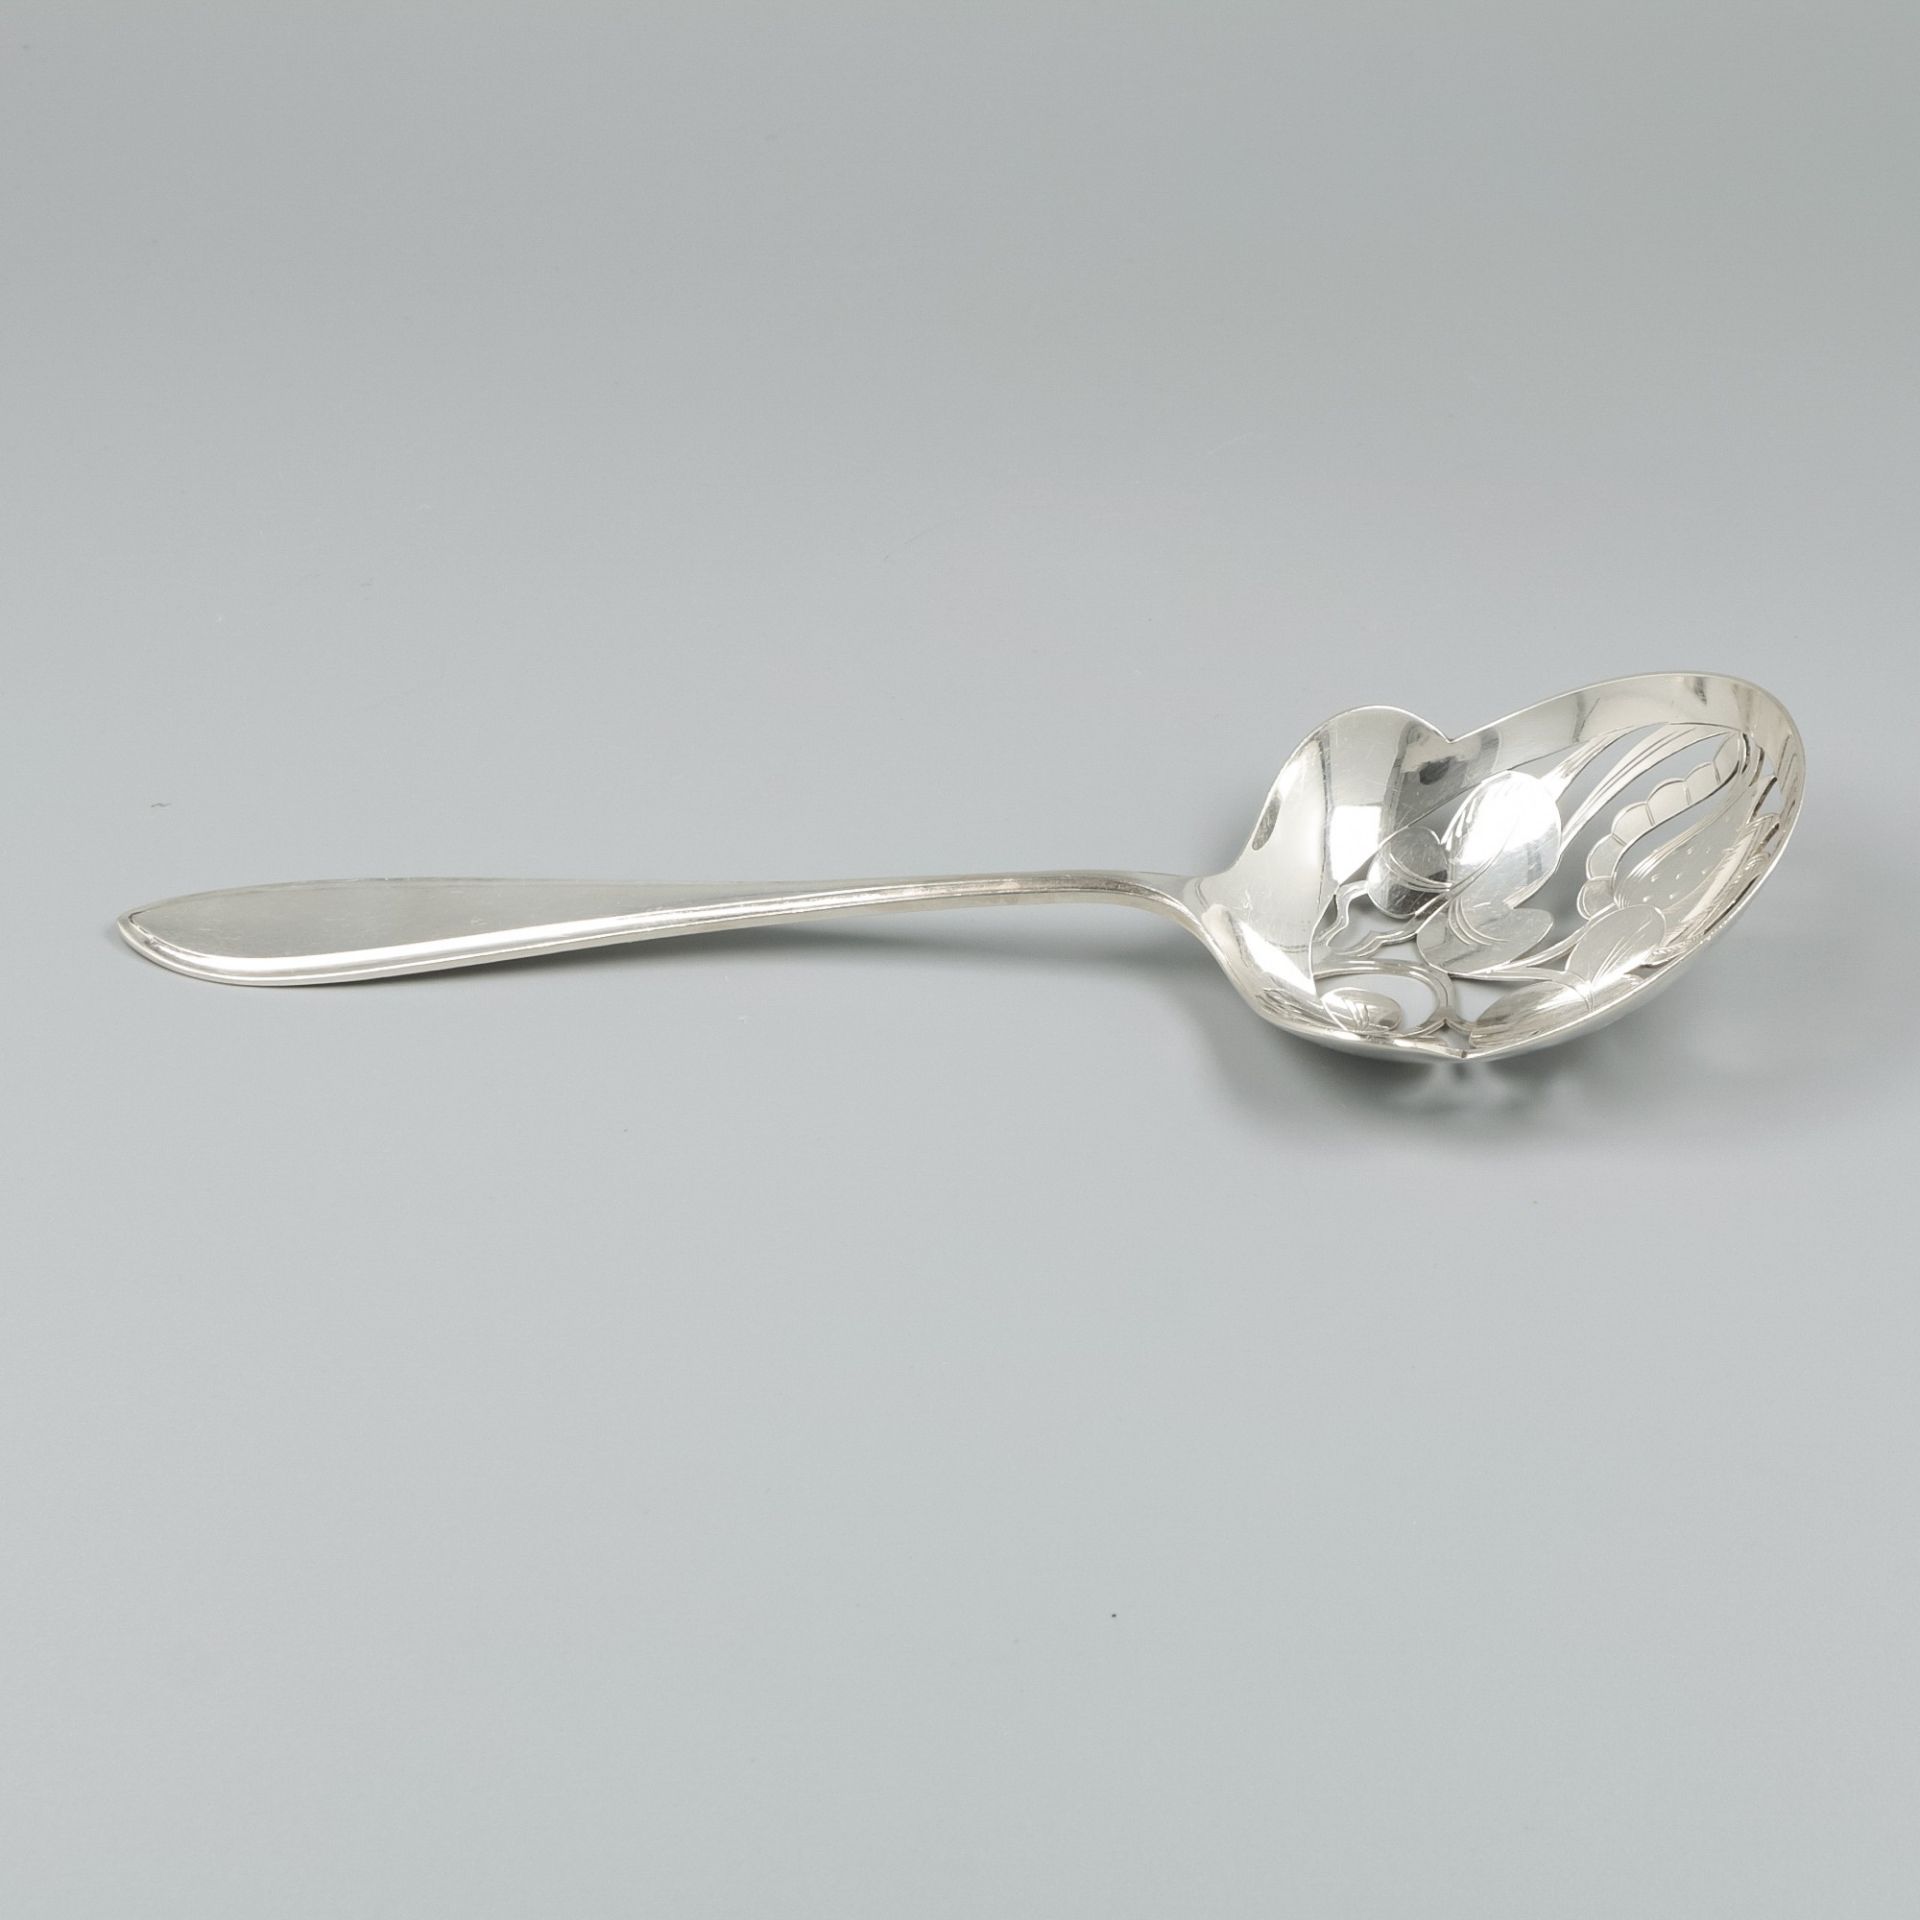 Silver strawberry spoon, model 1064 designed by Christa Ehrlich. - Image 3 of 8